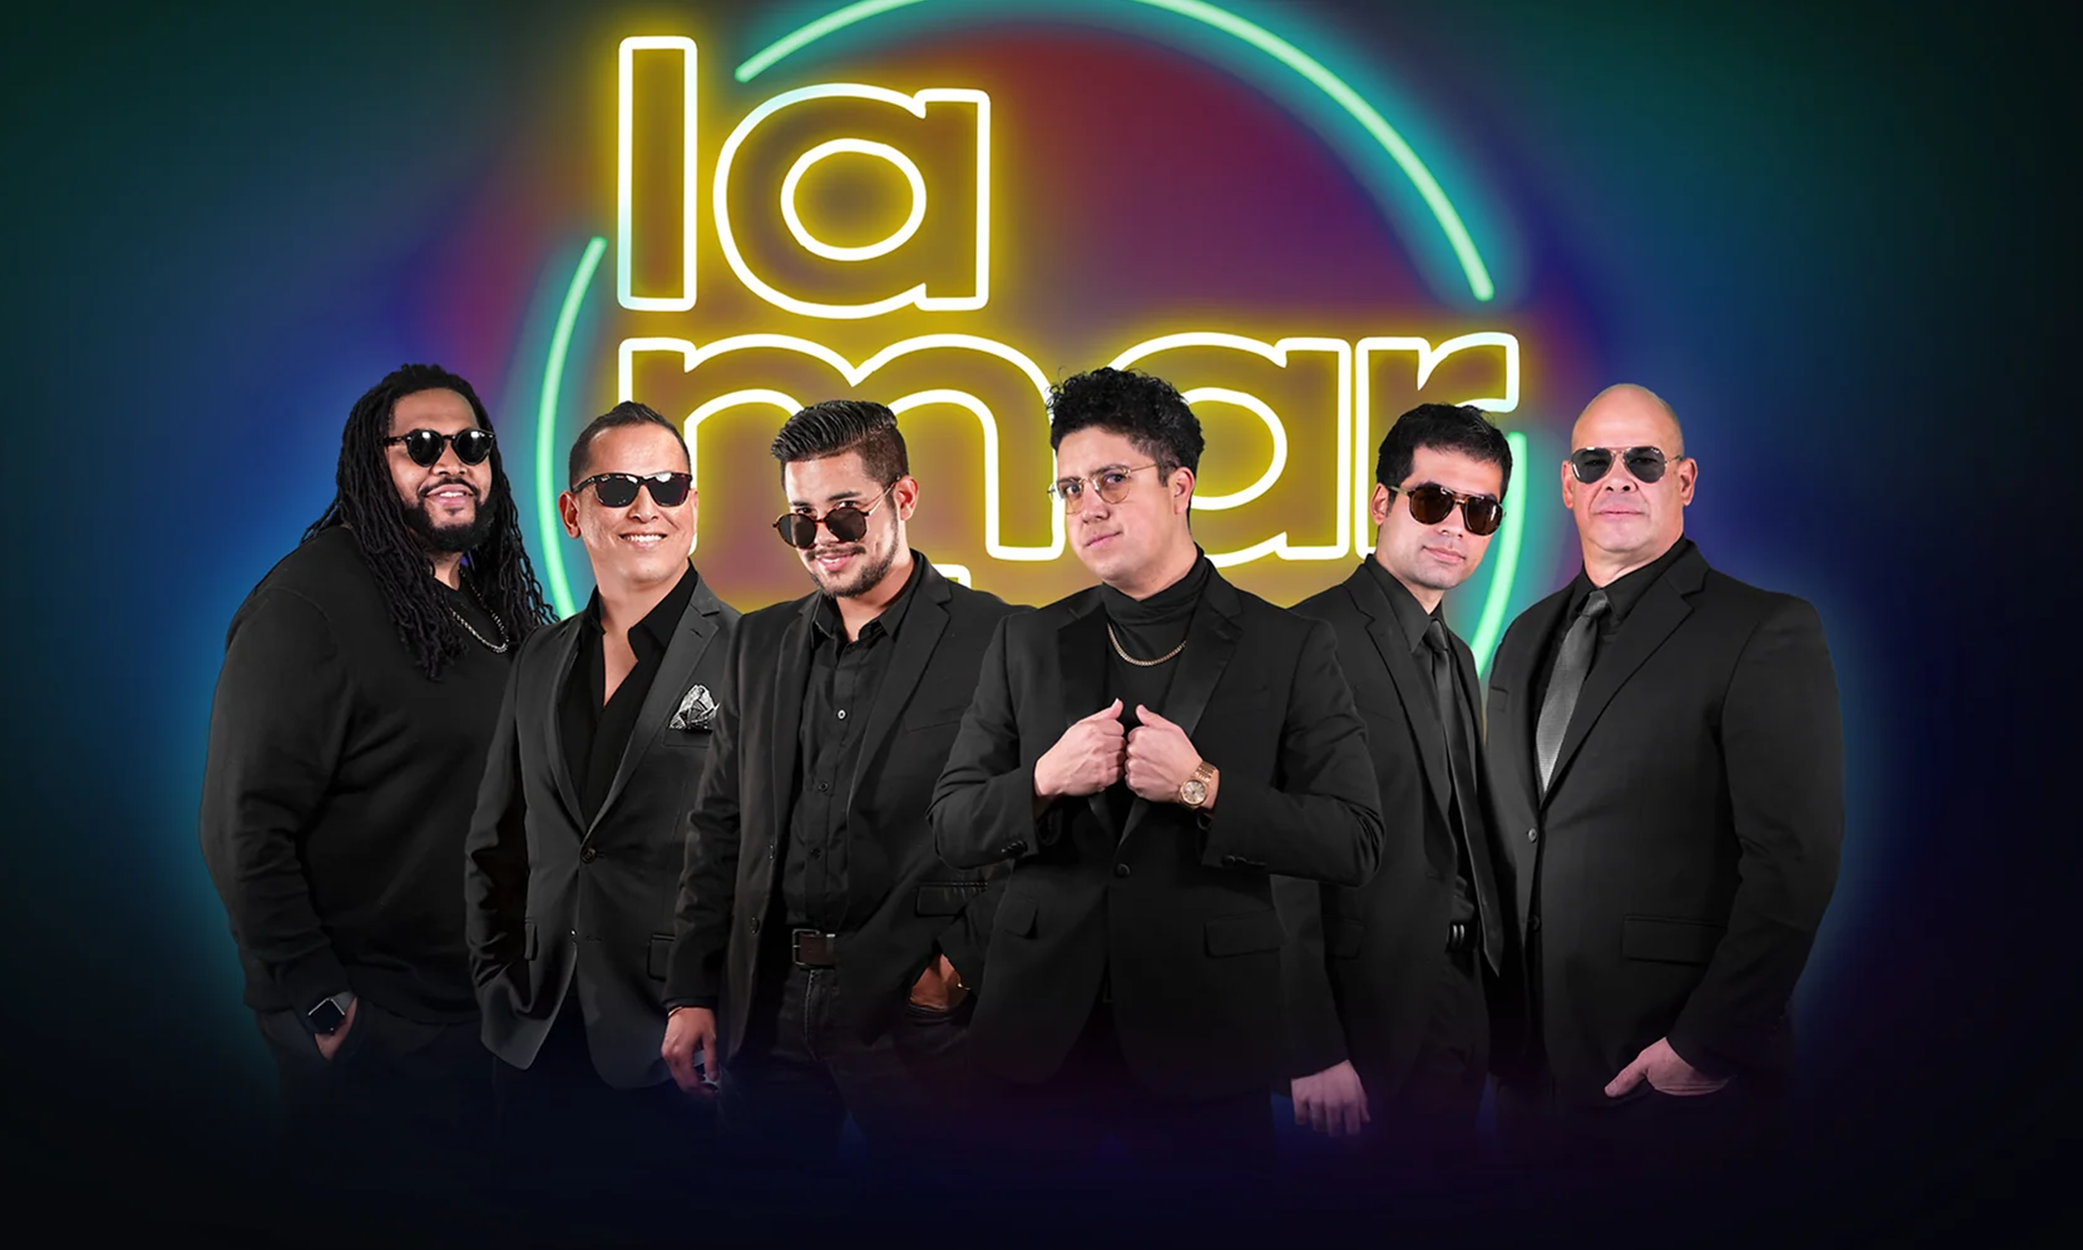 Image of six men, La Marcha Sound members, in black dress jackets with a neon sign of their band name behind them.